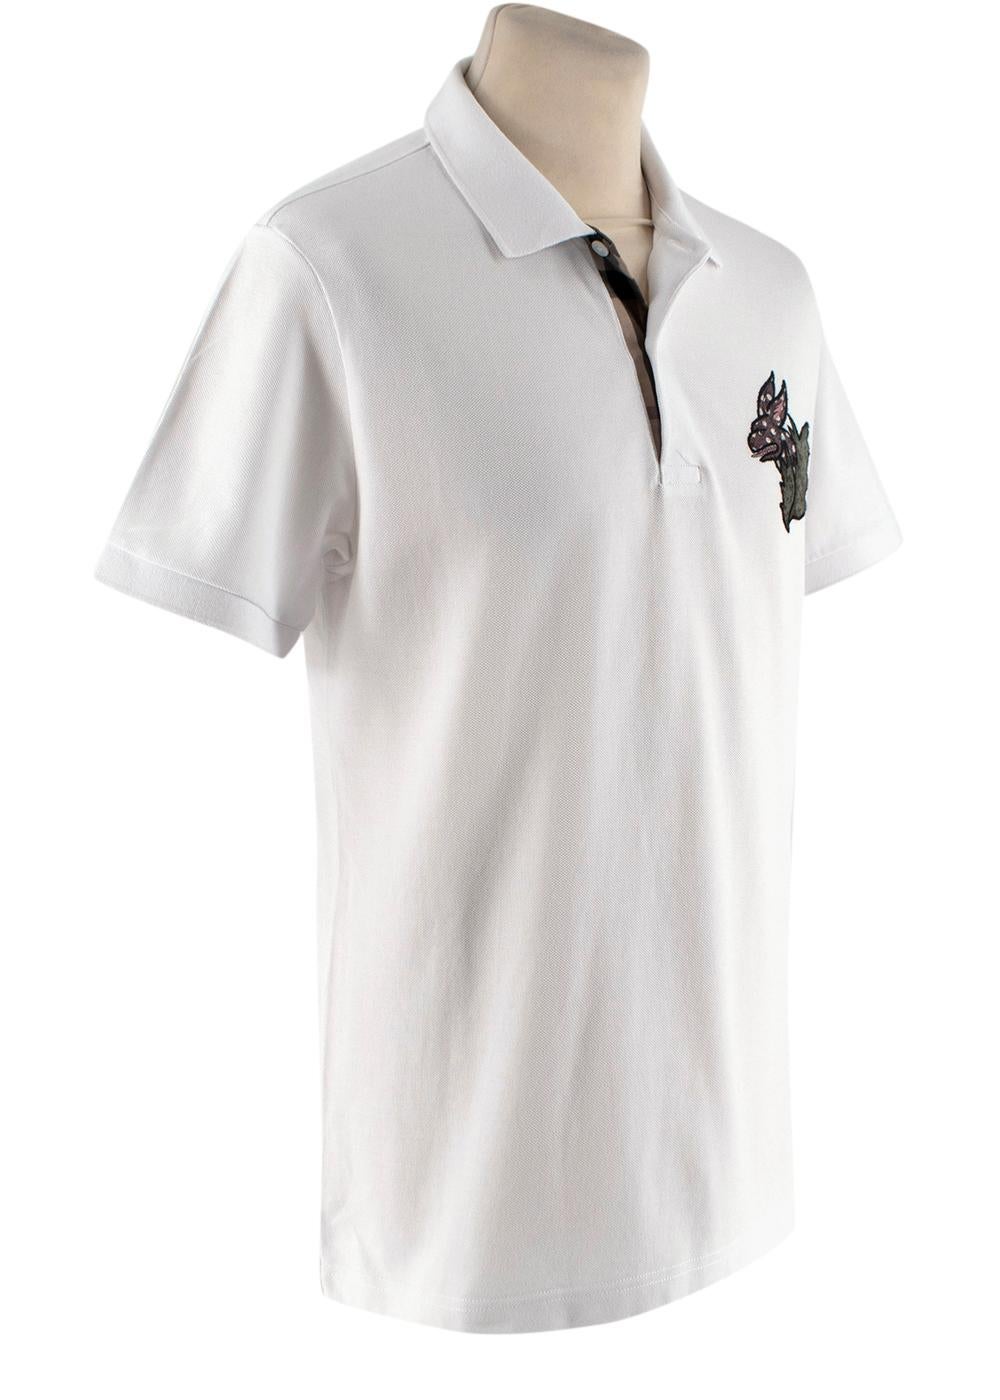 Burberry White Cotton Pique Polo Shirt with Dragon Applique

- White cotton pique polo shirt with ribbed collar, and 2 button fastening
- Cartoon dragon applique on the breast
- Placket revere furnished in signature check
- Slim